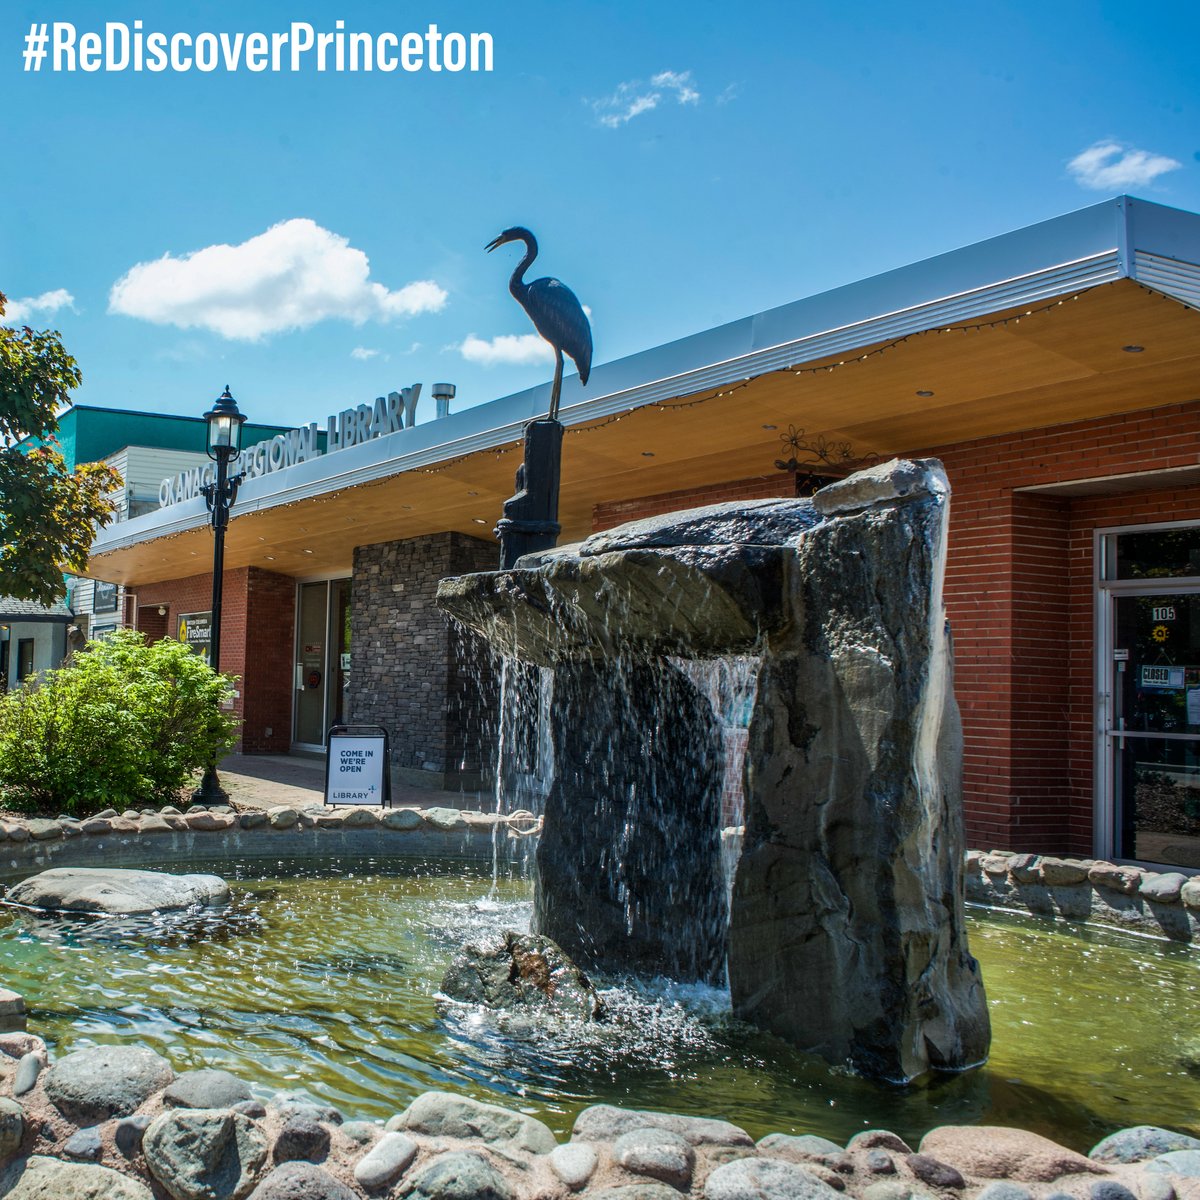 🌲✨🇨🇦Whats on your summer reading list? If you are visiting the Library. 📸 Stop by and see the Crane sculpture, and feel refreshed at the beautiful fountain. 🇨🇦✨

#RediscoverPrinceton #princetonbc #townofprincetonbc